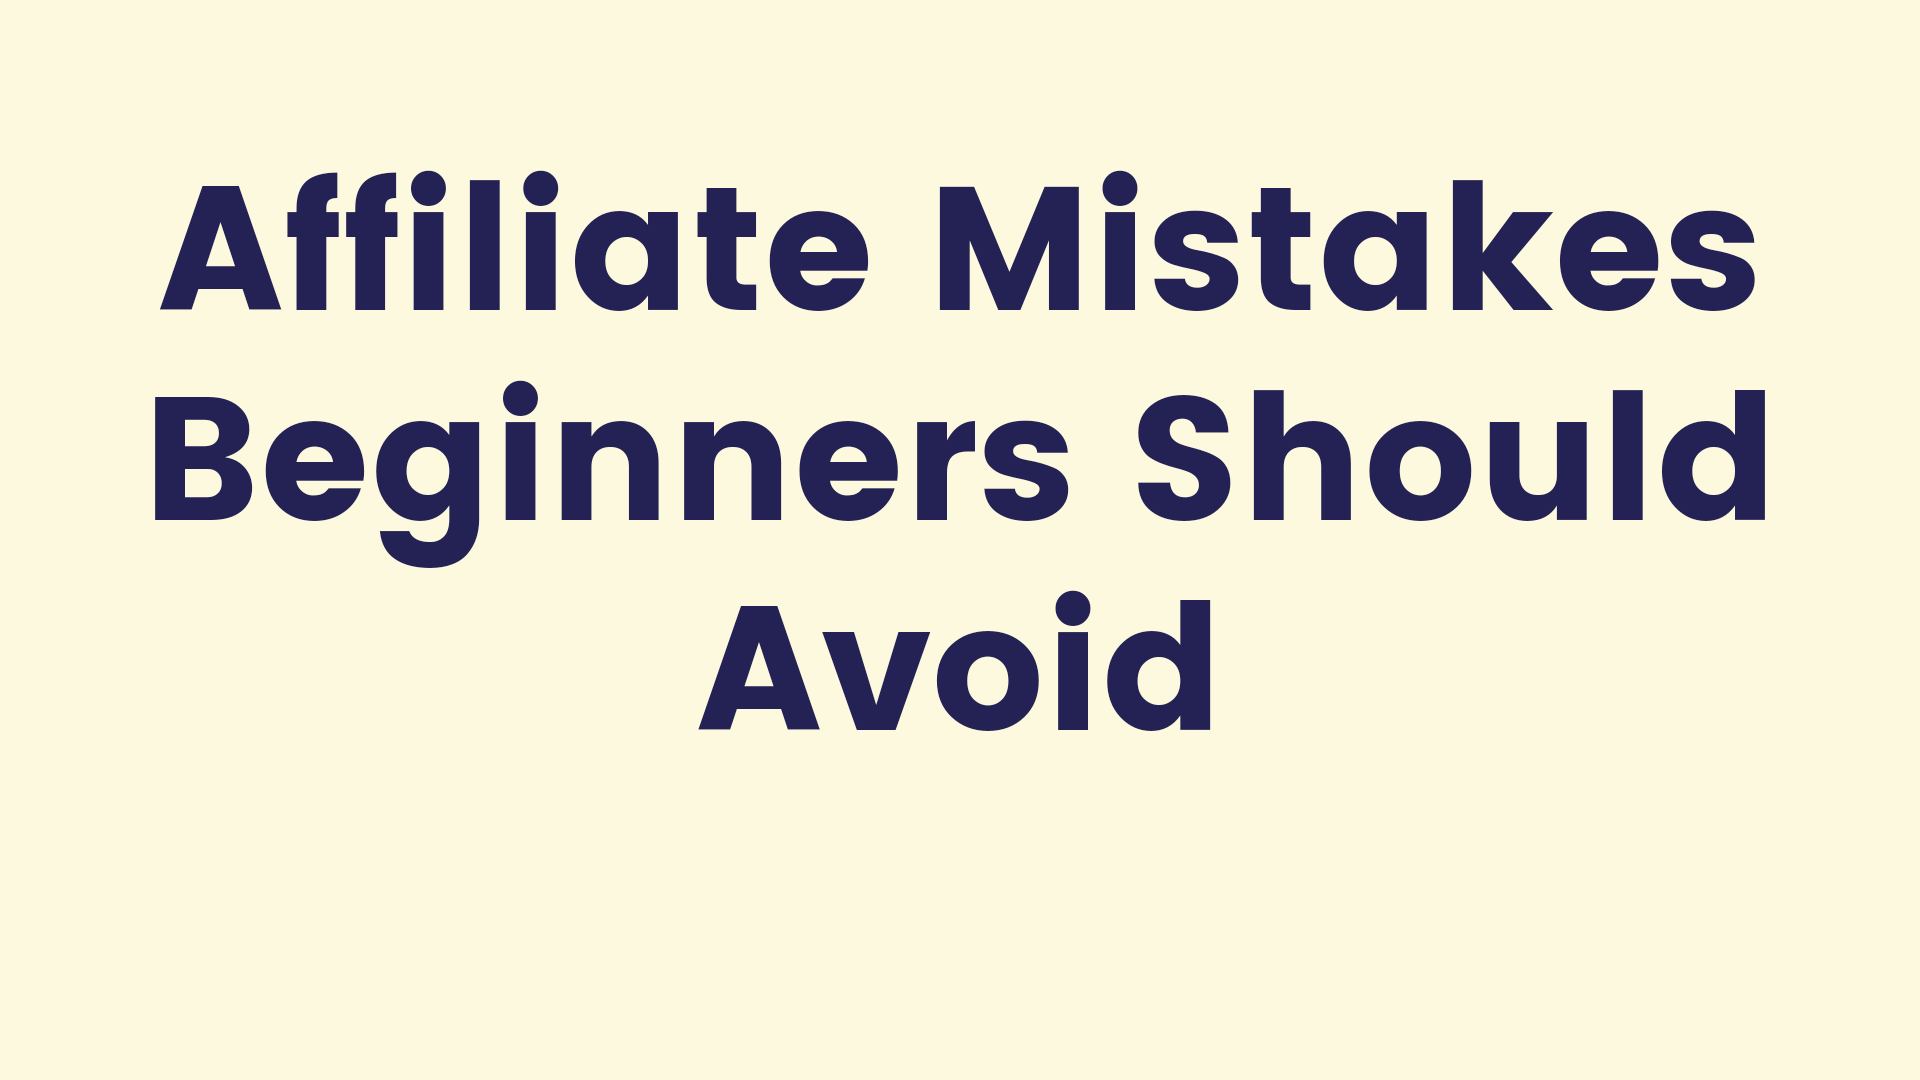 The image is a graphic related to Affiliate Mistakes.